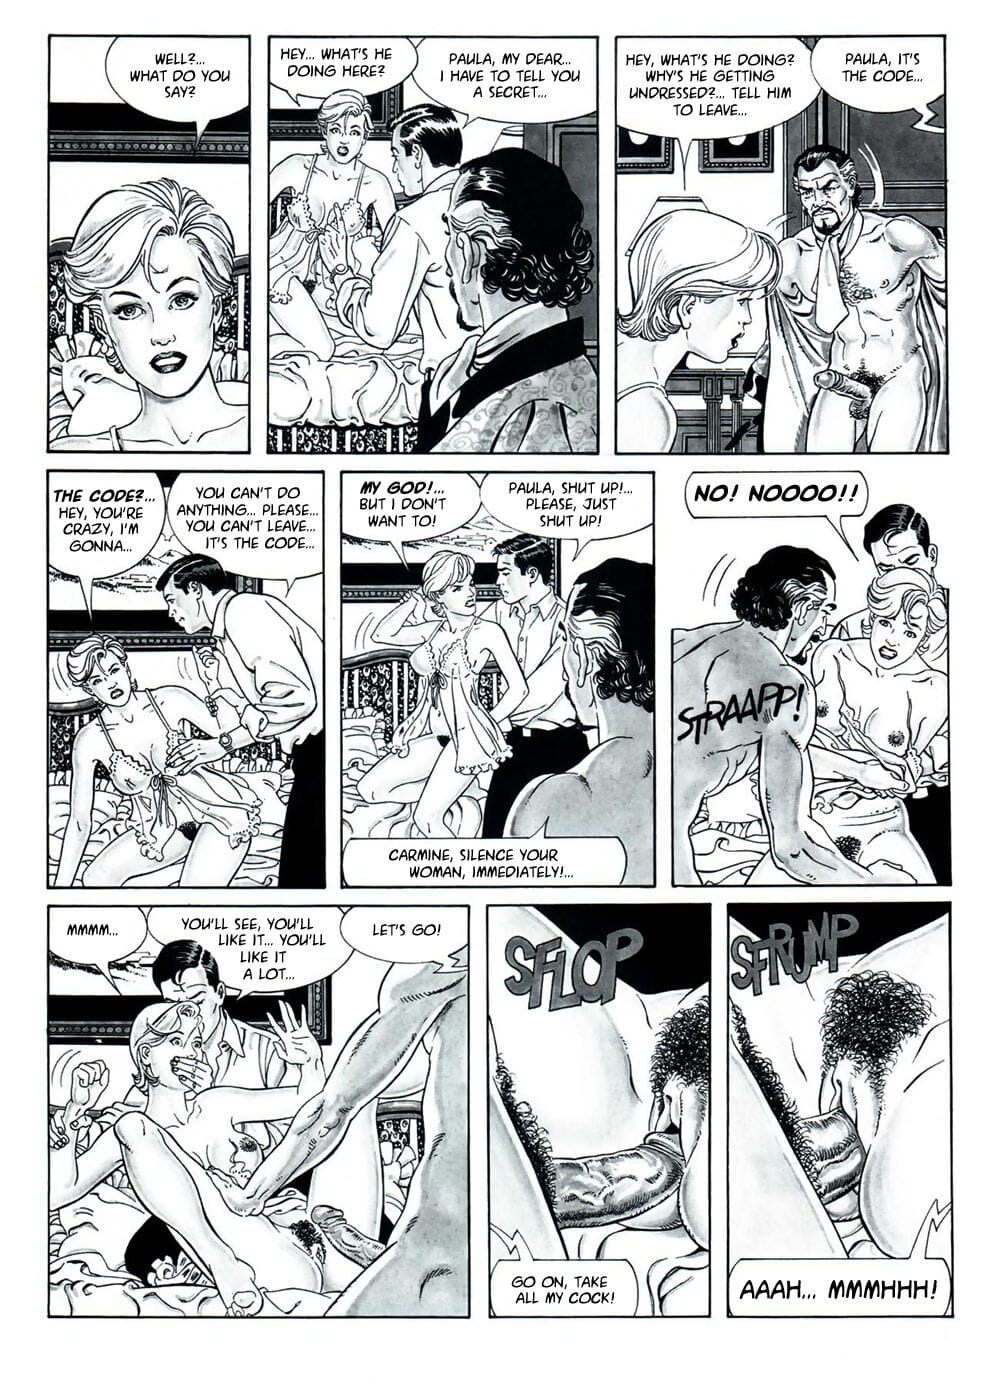 Training and Punishment: Honeymoon In Sicily page 1